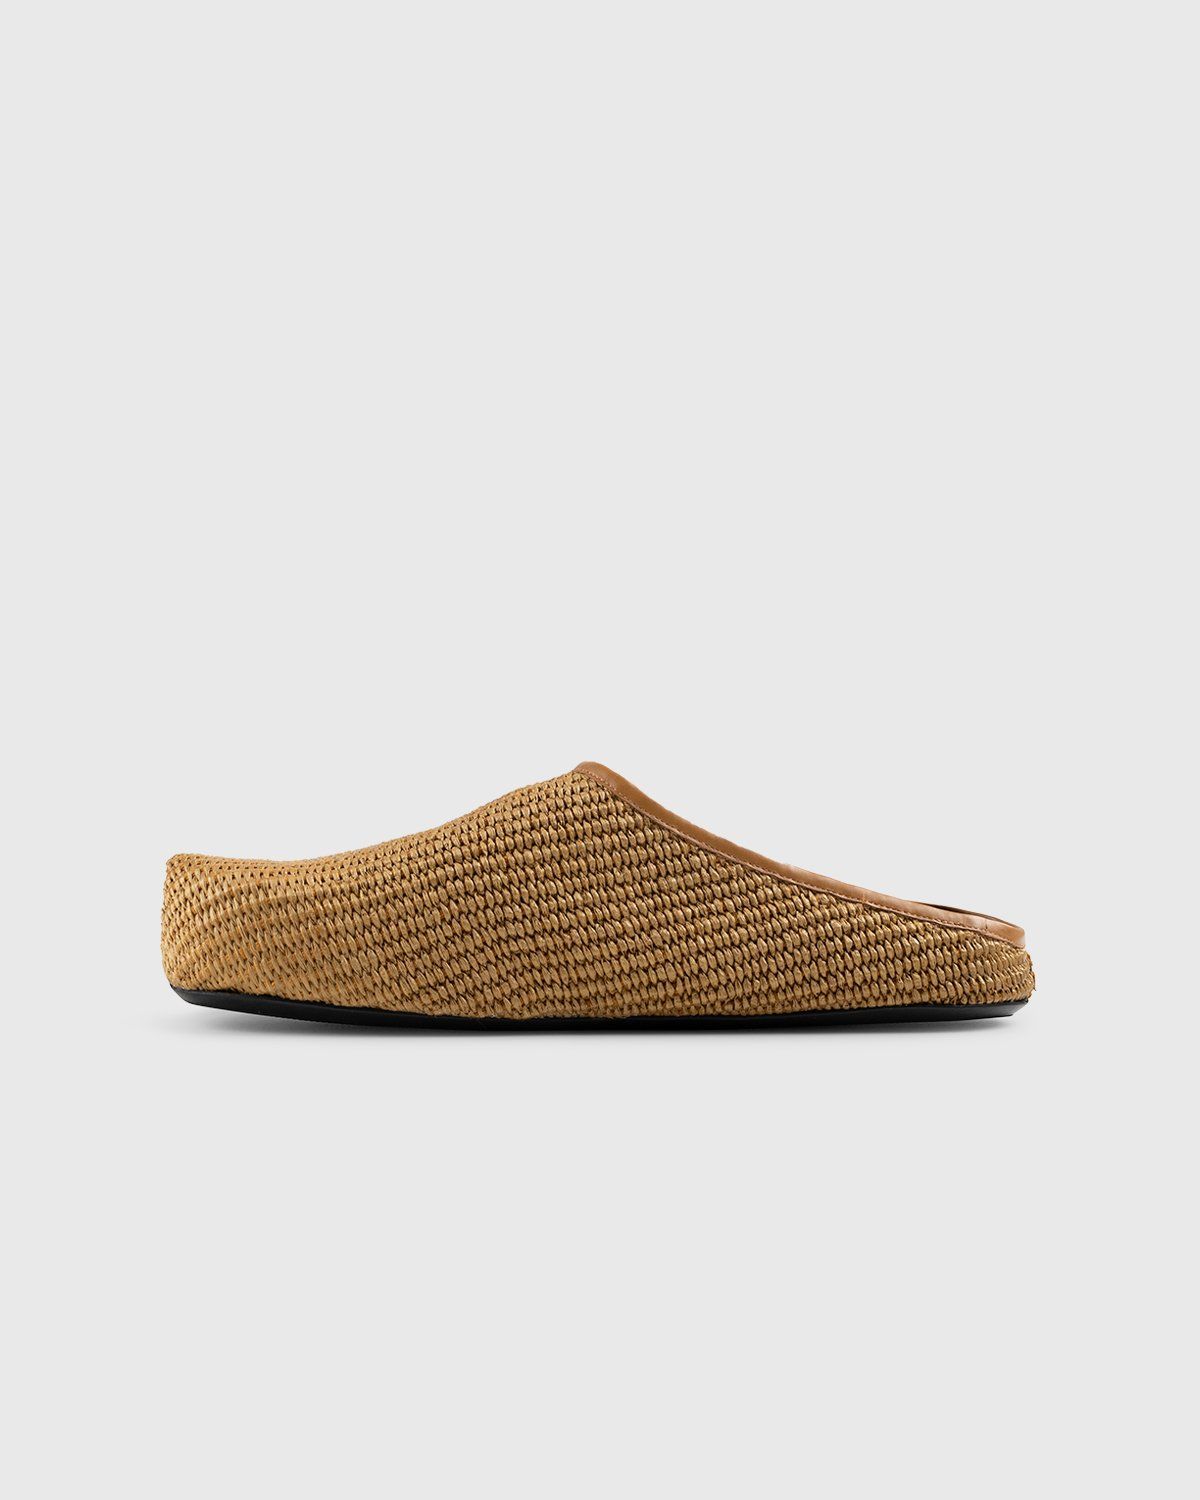 Marni – Woven Raffia and Leather Mules Brown/Black - Mules - Brown - Image 2